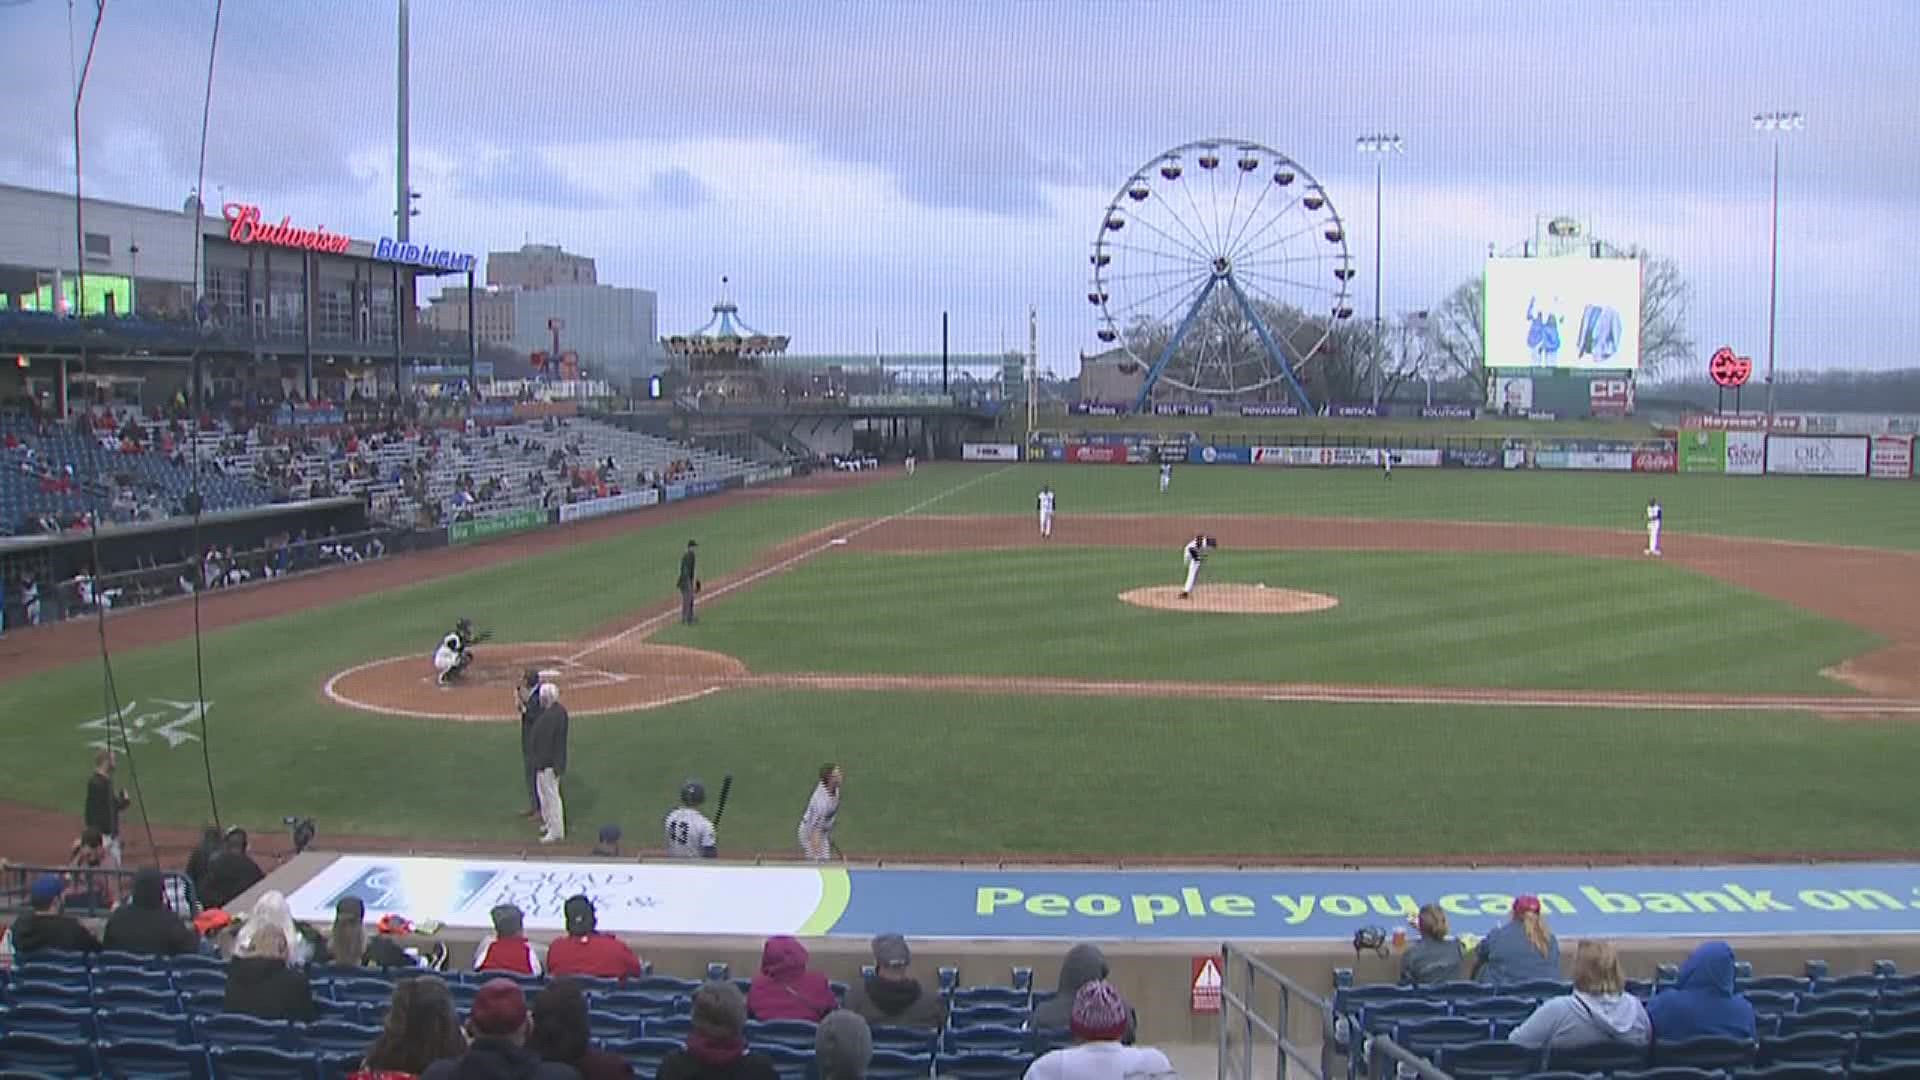 The Bandits' home opener was spoiled by an 8-1 loss to the Cedar Rapids Kernels on Tuesday. The two teams kicked off a six-game series at Modern Woodmen Park.